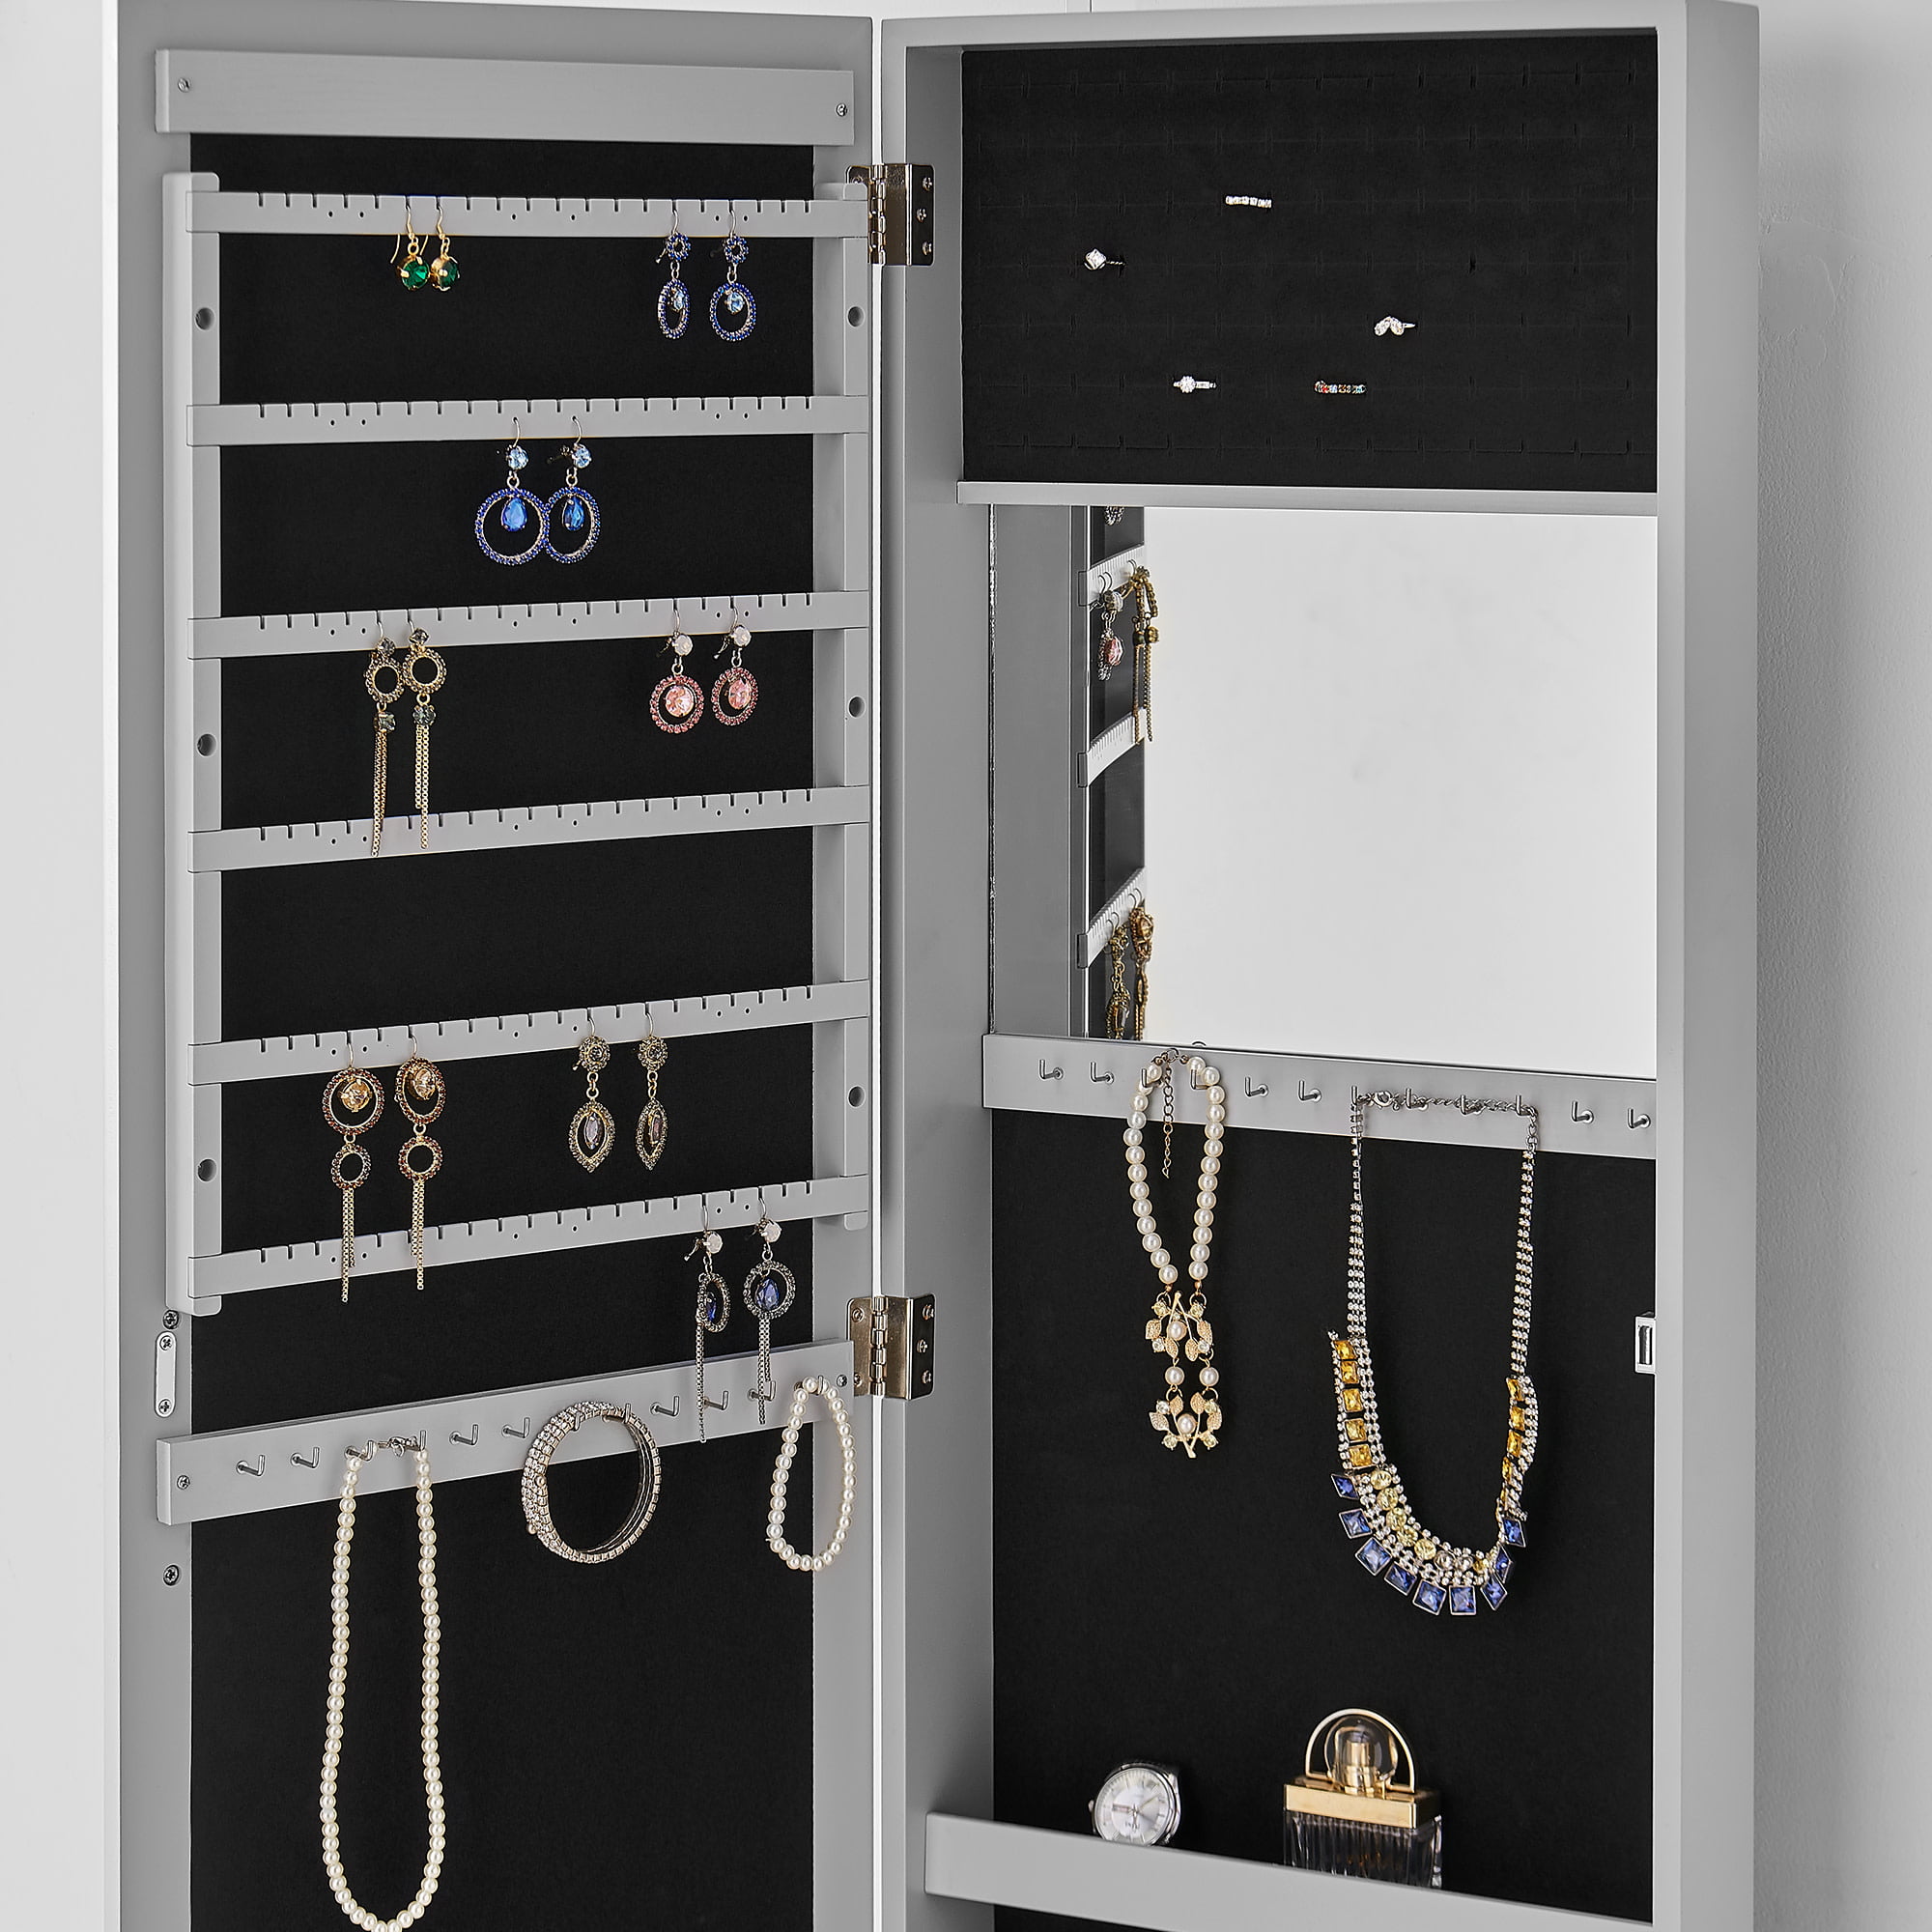 55. Before and After: Shutter Door Jewelry Storage – The Craft Queen